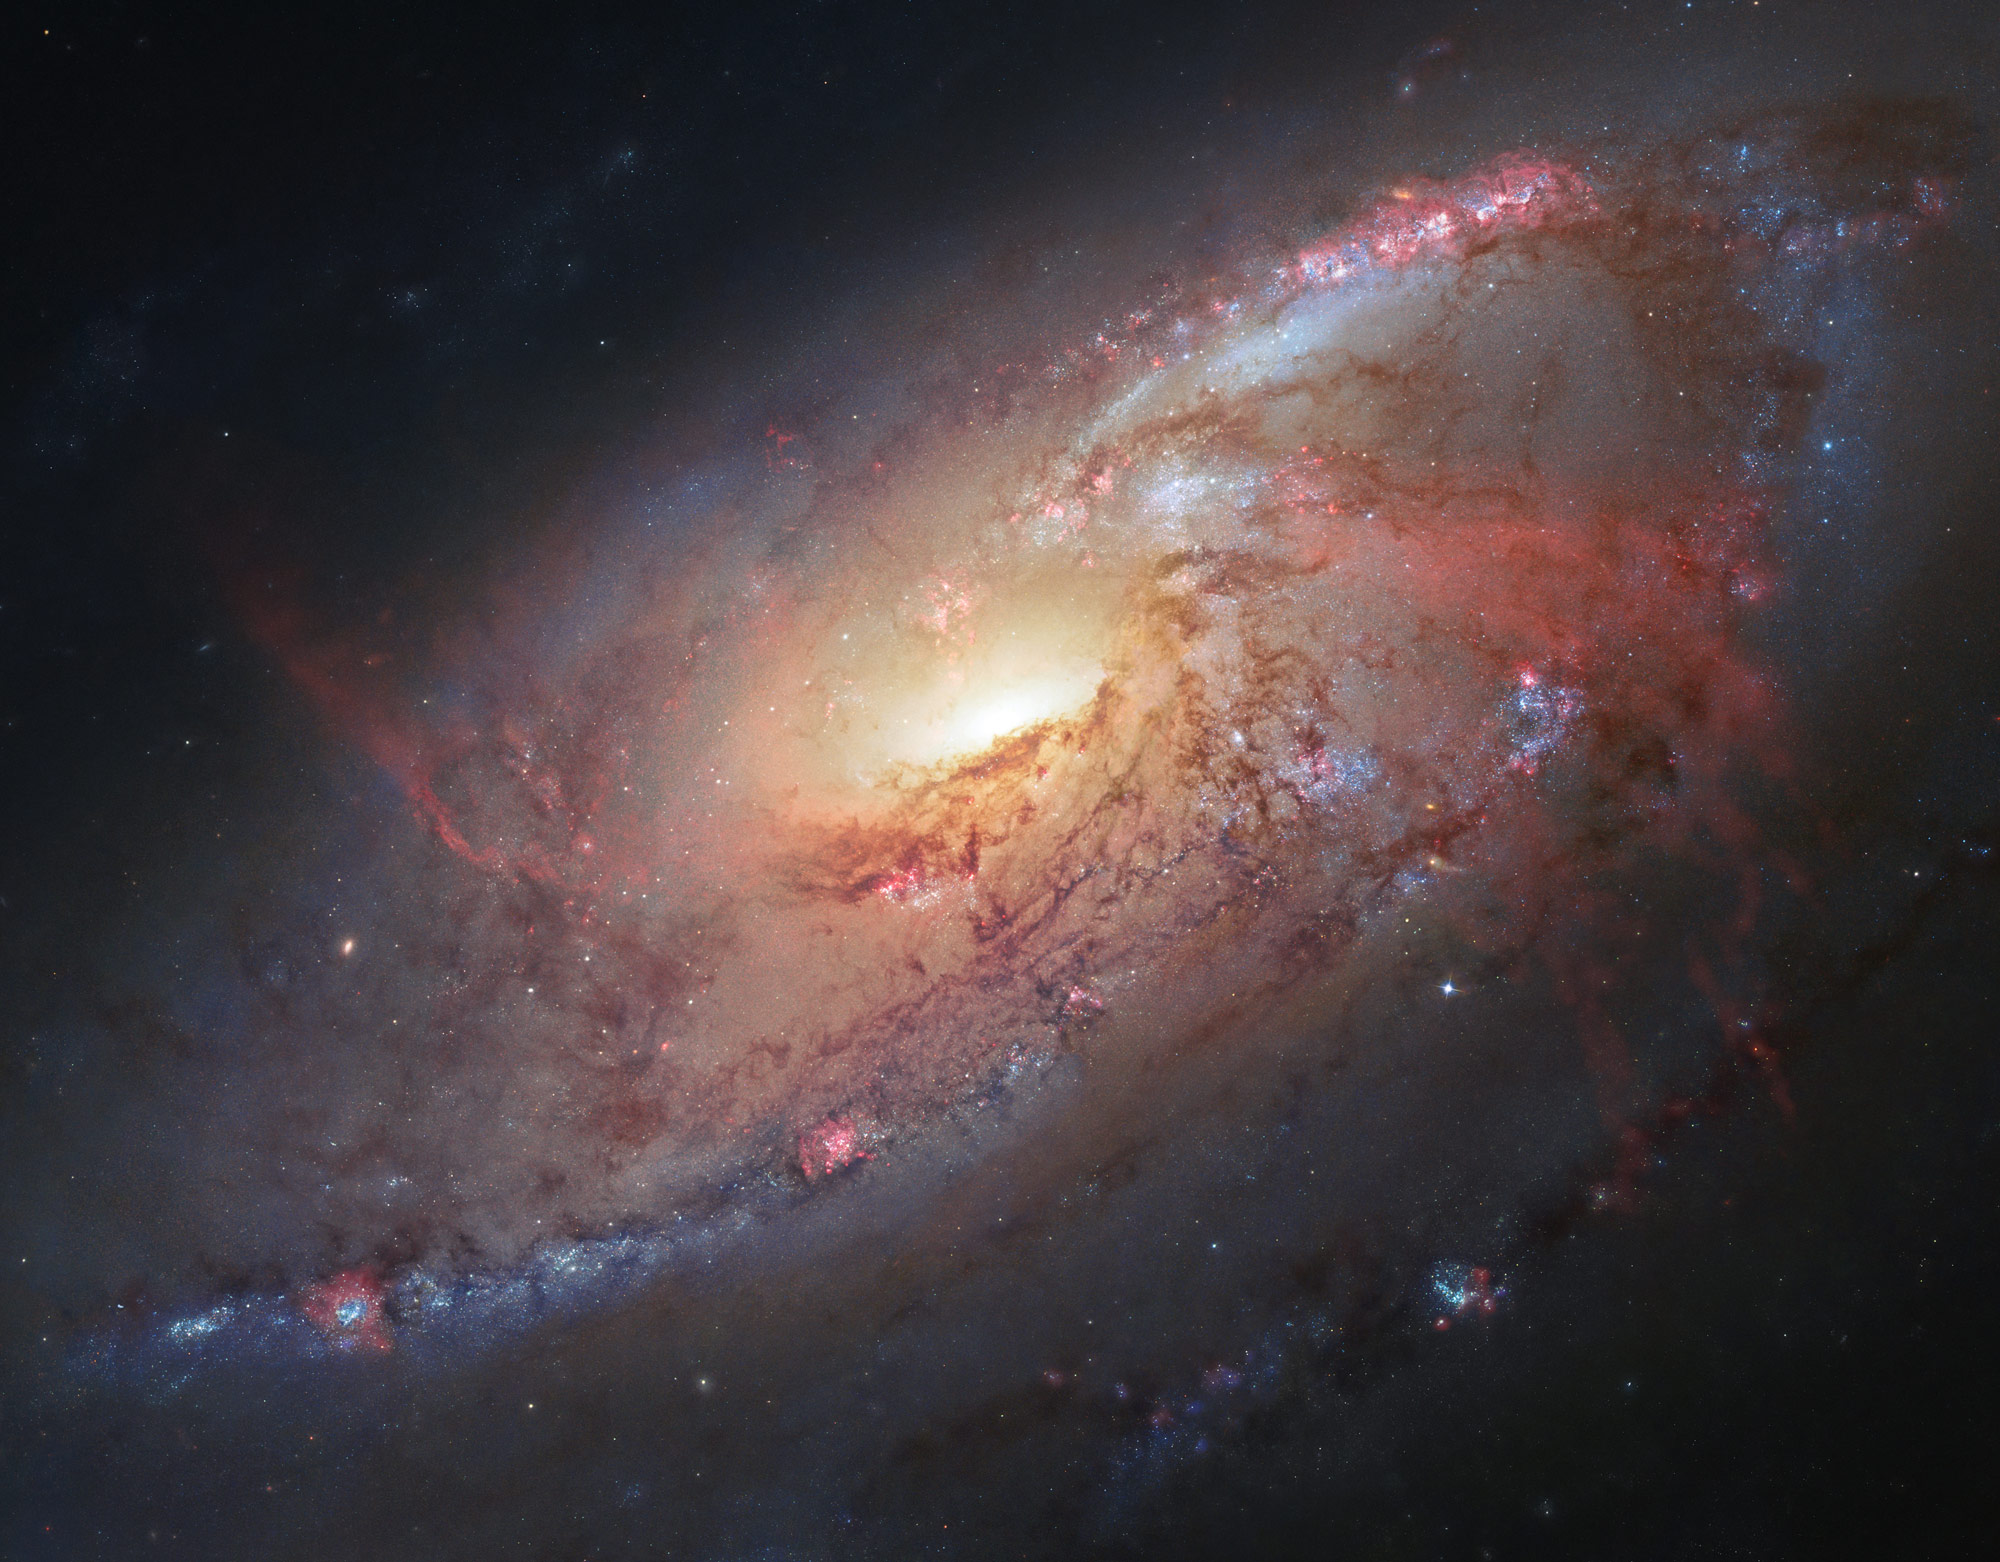 Unique Features of Spiral Galaxy Messier 106